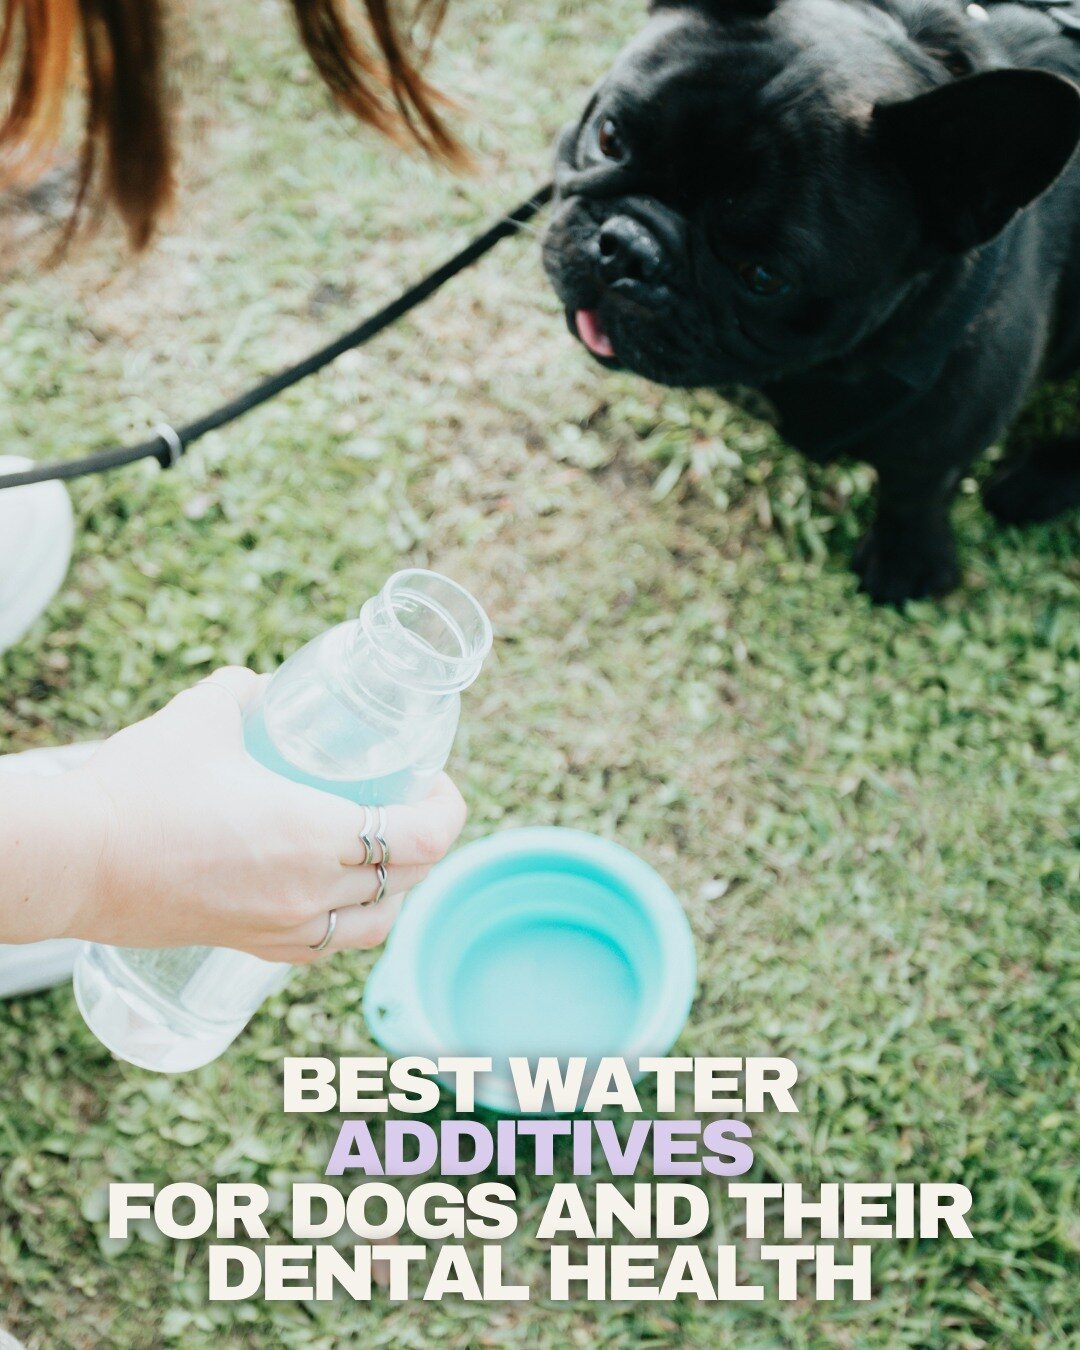 How Water Additives Can Improve Your Dog's Teeth⁠
⁠
Very few dogs enjoy having their teeth brushed, but that doesn&rsquo;t mean that dental care is any less important. ⁠
⁠
Studies have found that as much as 80% of dogs will experience some degree of 